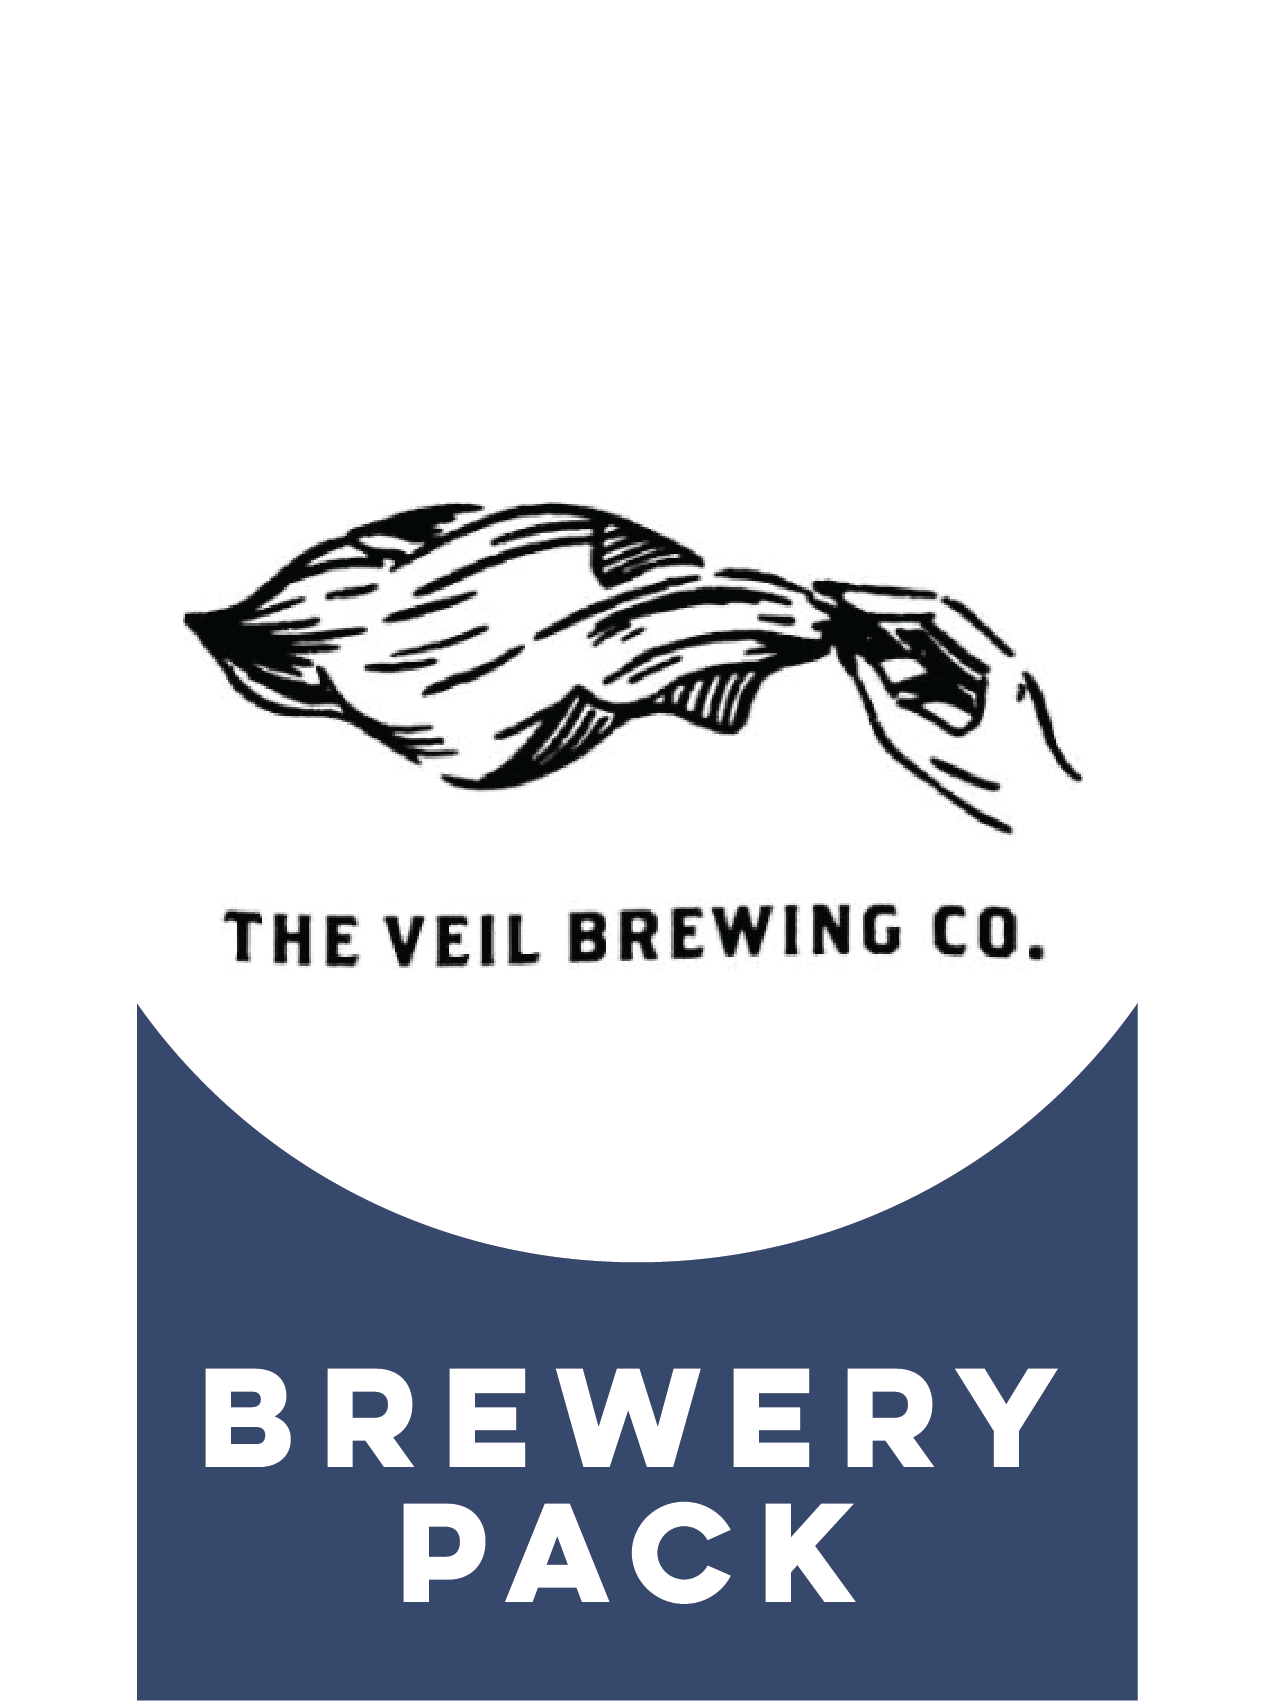 -The Veil- The Veil Brewery Pack-Packs & Cases- Only @ Beer Republic - The best online beer store for American & Canadian craft beer - Buy beer online from the USA and Canada - Bier online kopen - Amerikaans bier kopen - Craft beer store - Craft beer kopen - Amerikanisch bier kaufen - Bier online kaufen - Acheter biere online - IPA - Stout - Porter - New England IPA - Hazy IPA - Imperial Stout - Barrel Aged - Barrel Aged Imperial Stout - Brown - Dark beer - Blond - Blonde - Pilsner - Lager - Wheat - Weizen 